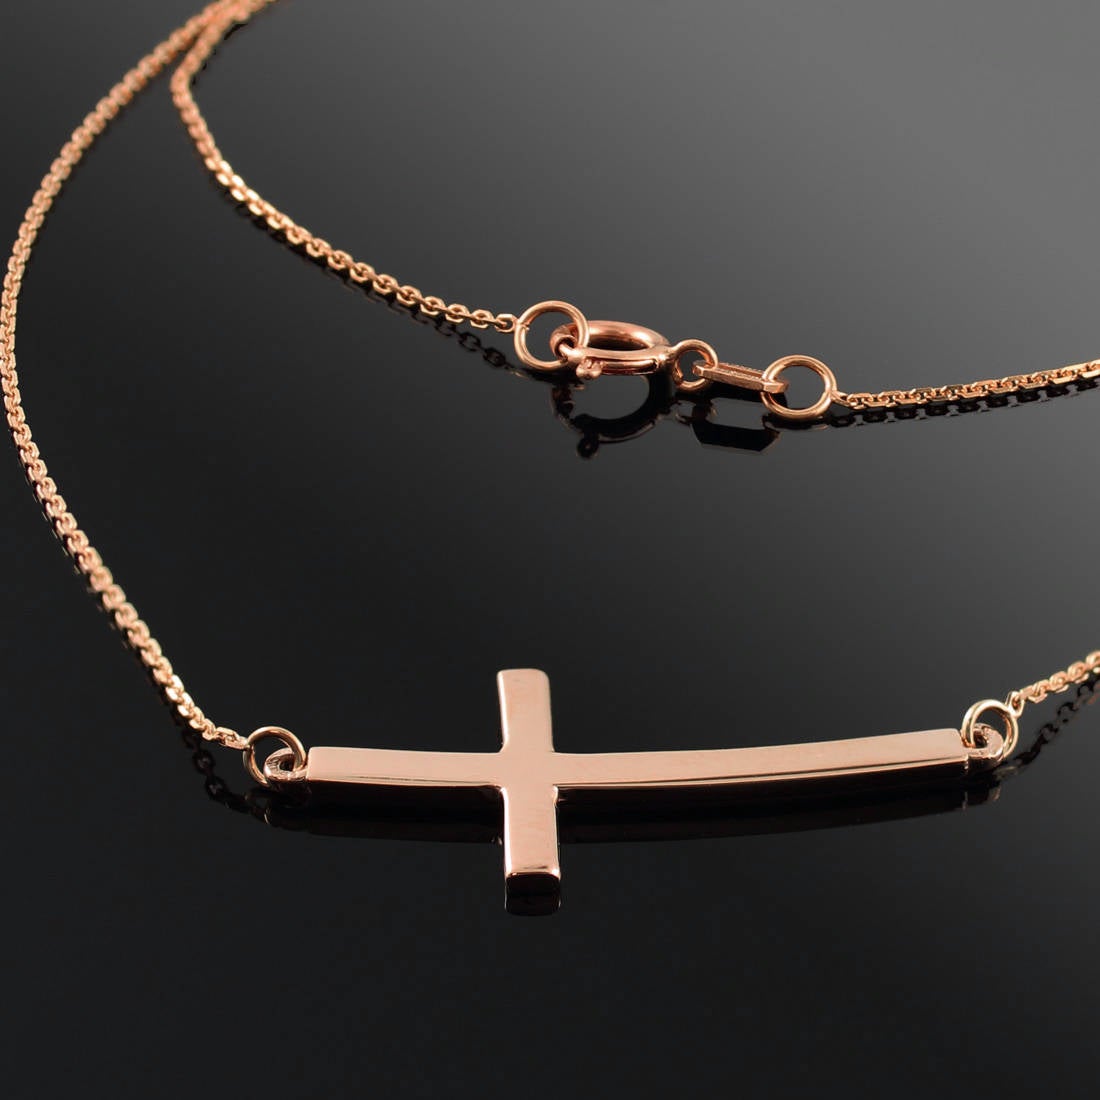 14K Solid Gold Sideways Curved Cross Necklace (yellow, white, rose gold) Karma Blingz